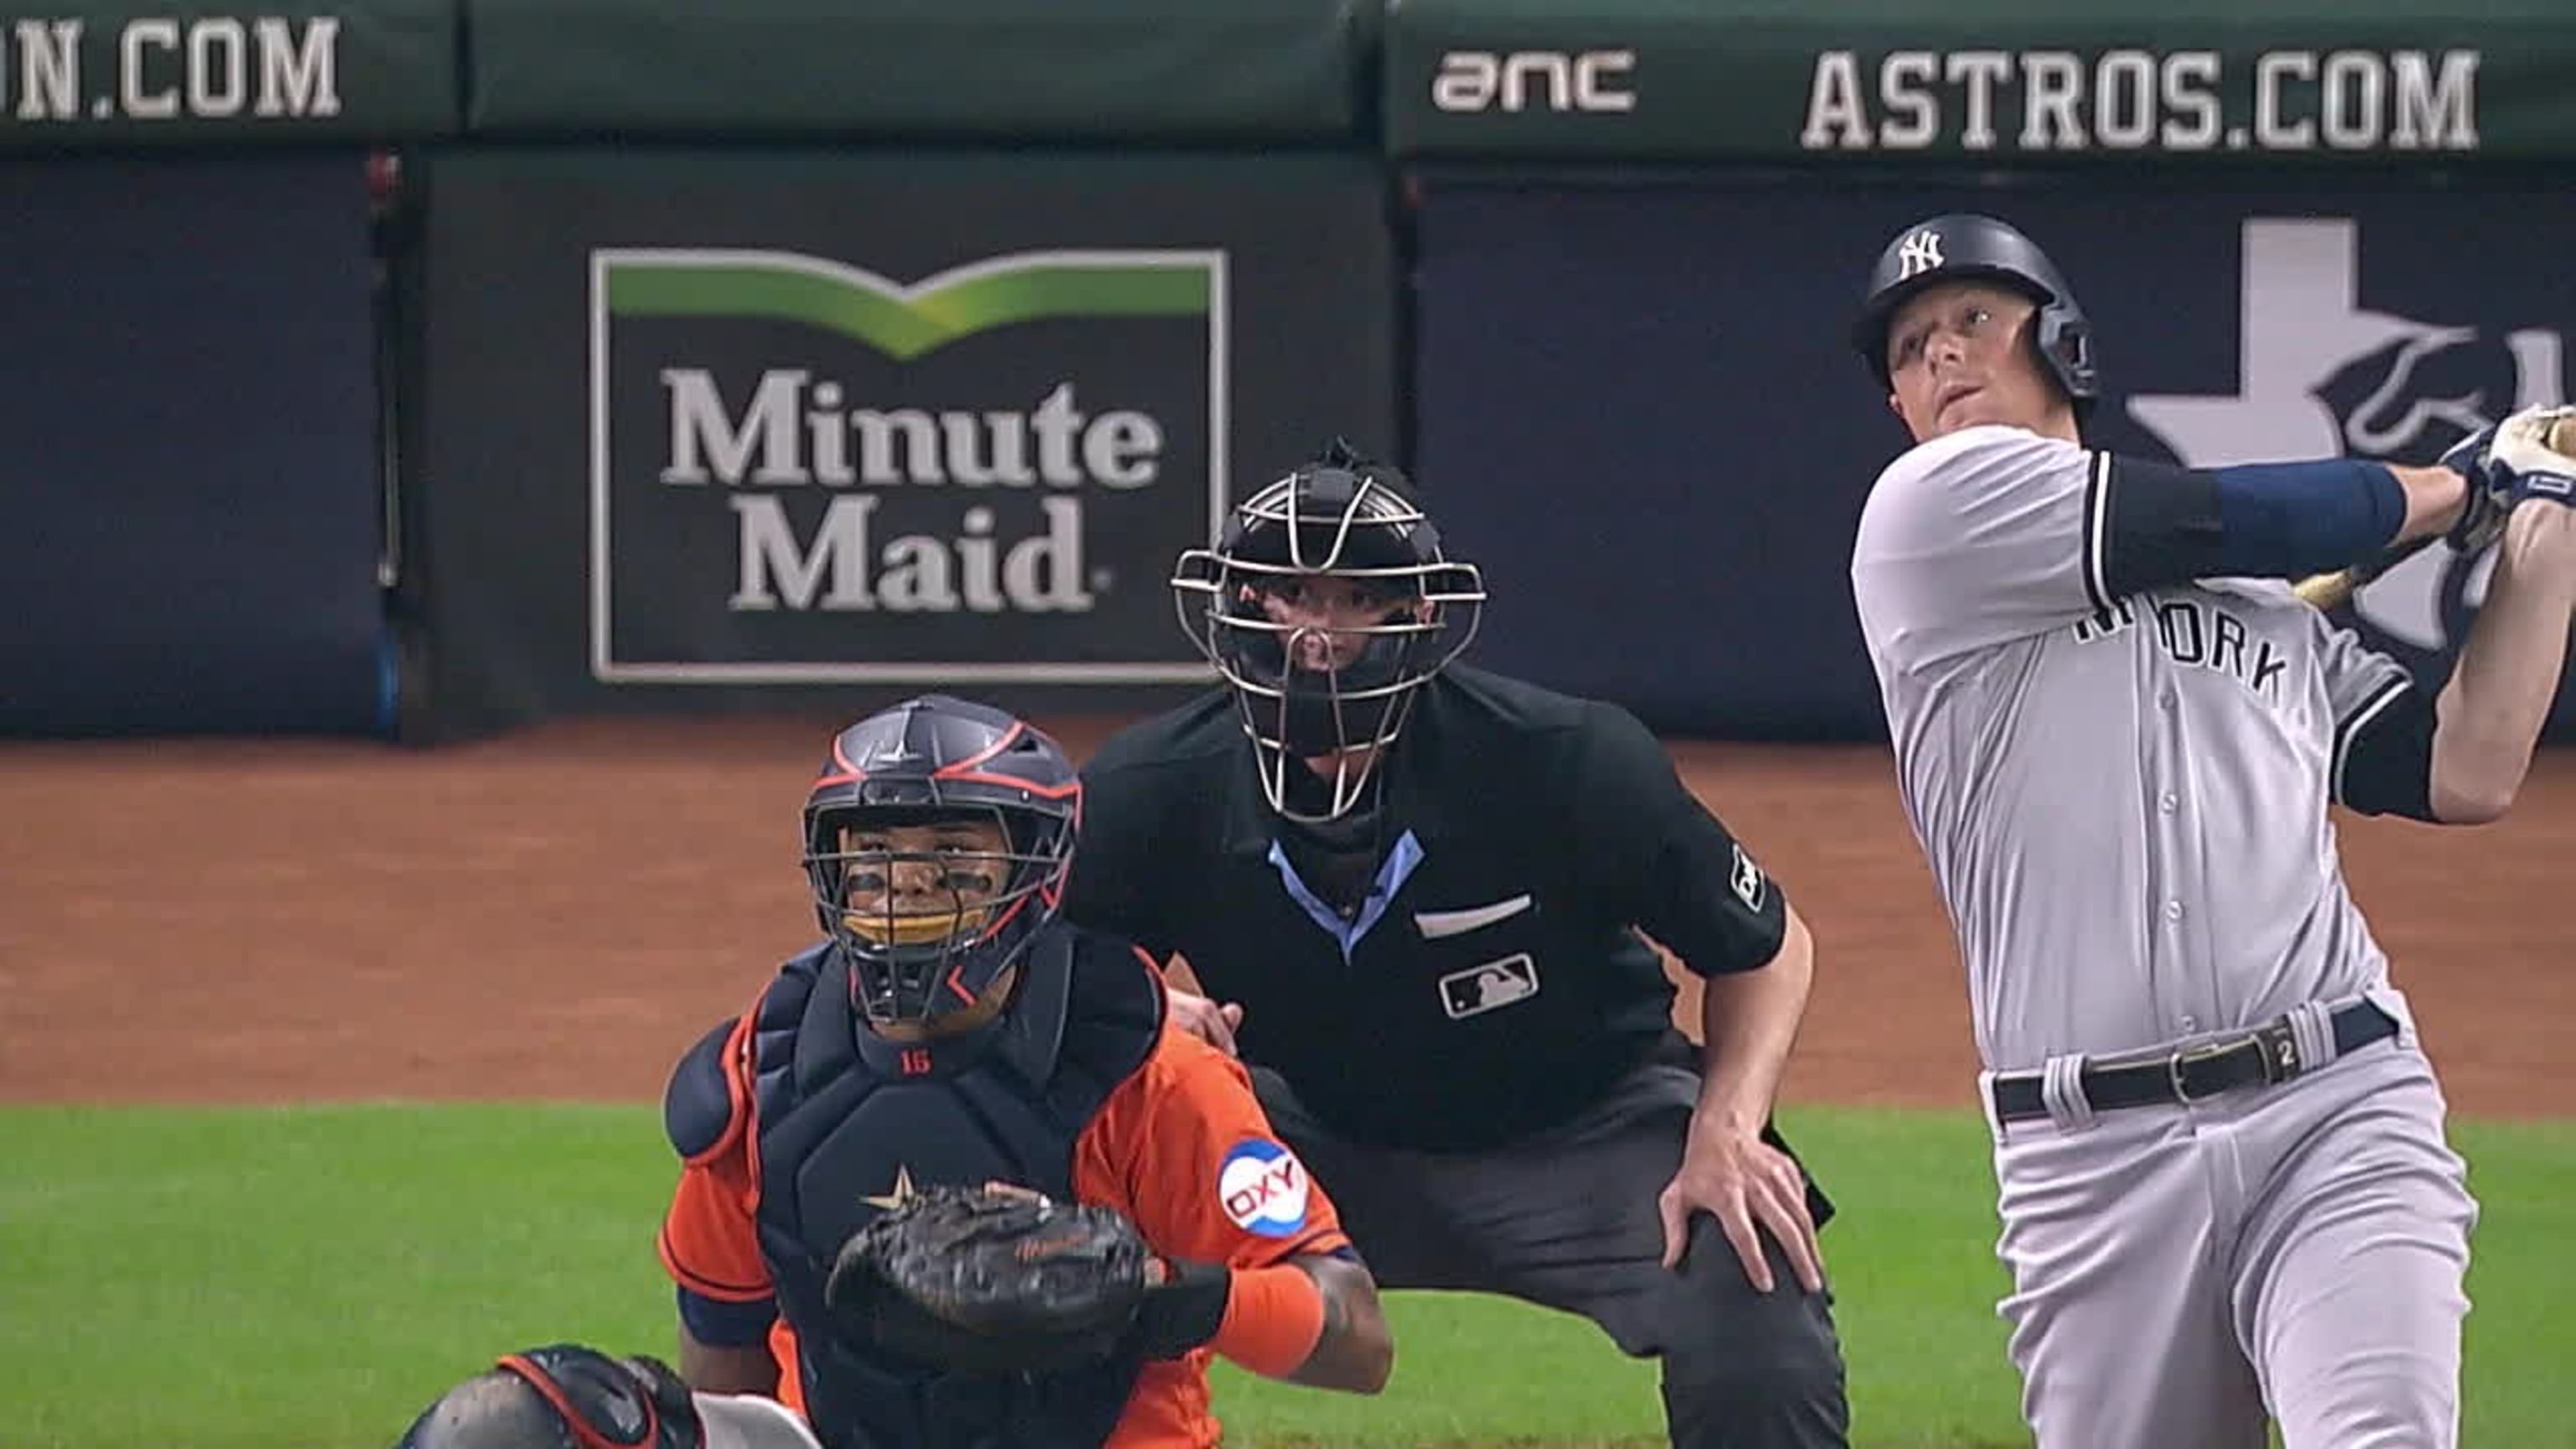 Baby Bomber! Dominguez homers in first at-bat off Verlander to